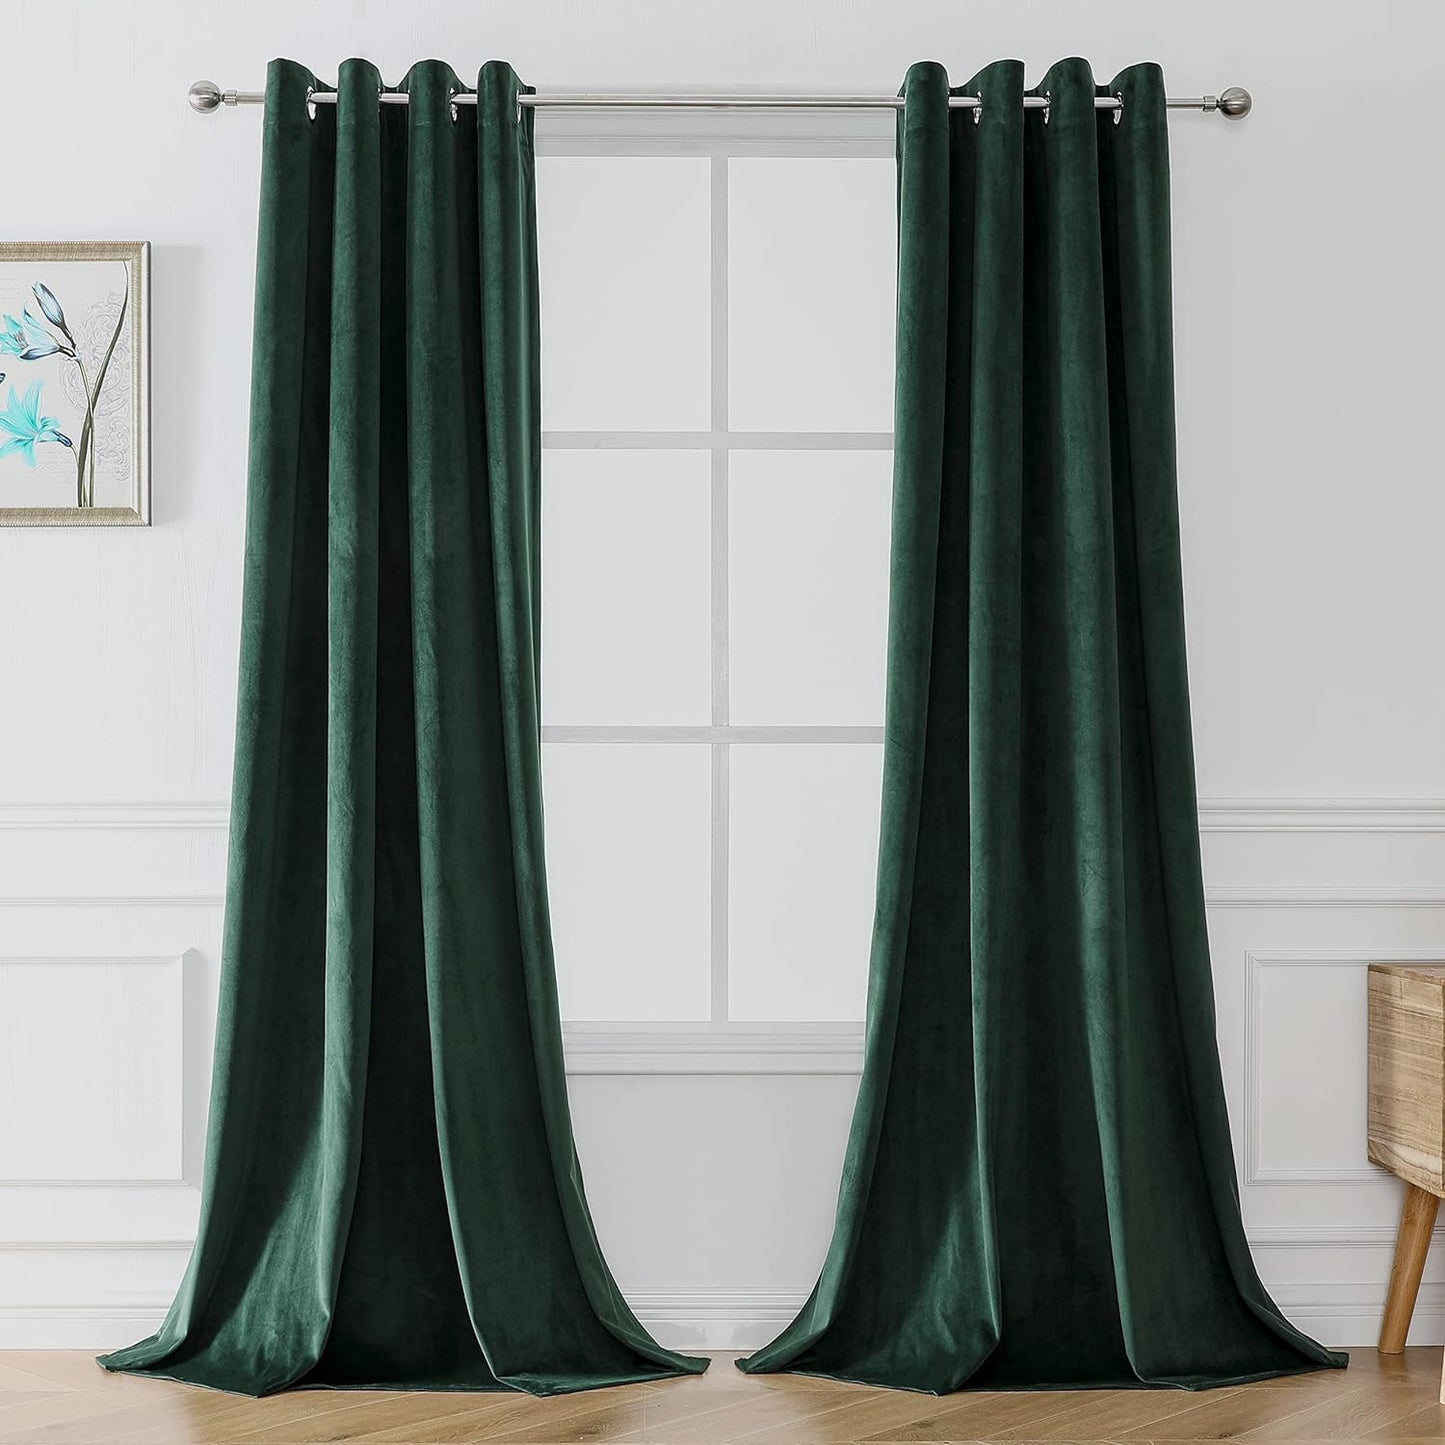 Victree Velvet Curtains for Bedroom, Blackout Curtains 52 X 84 Inch Length - Room Darkening Sun Light Blocking Grommet Window Drapes for Living Room, 2 Panels, Navy  Victree Dark Green 52 X 108 Inches 